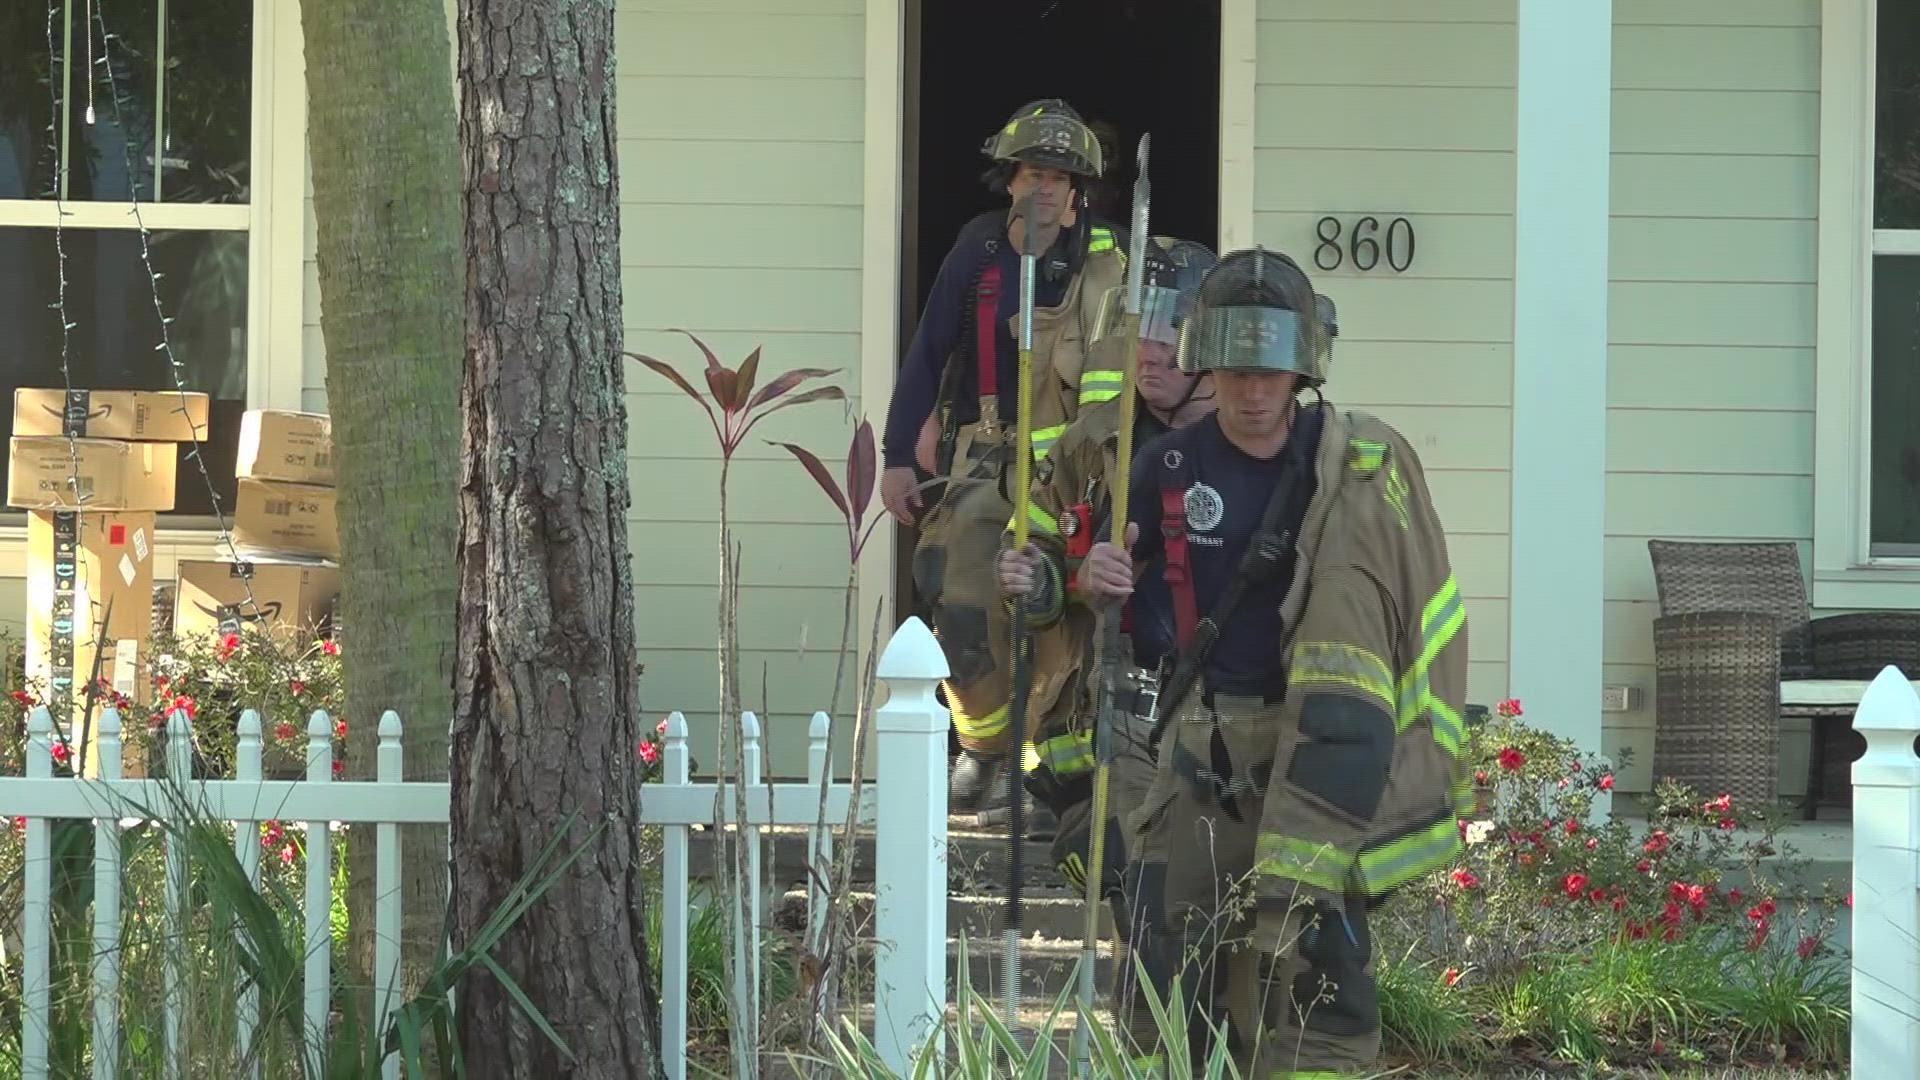 The Atlantic Beach Fire Department and the Jacksonville Fire and Rescue Department responded to the scene after a neighbor called in the fire.